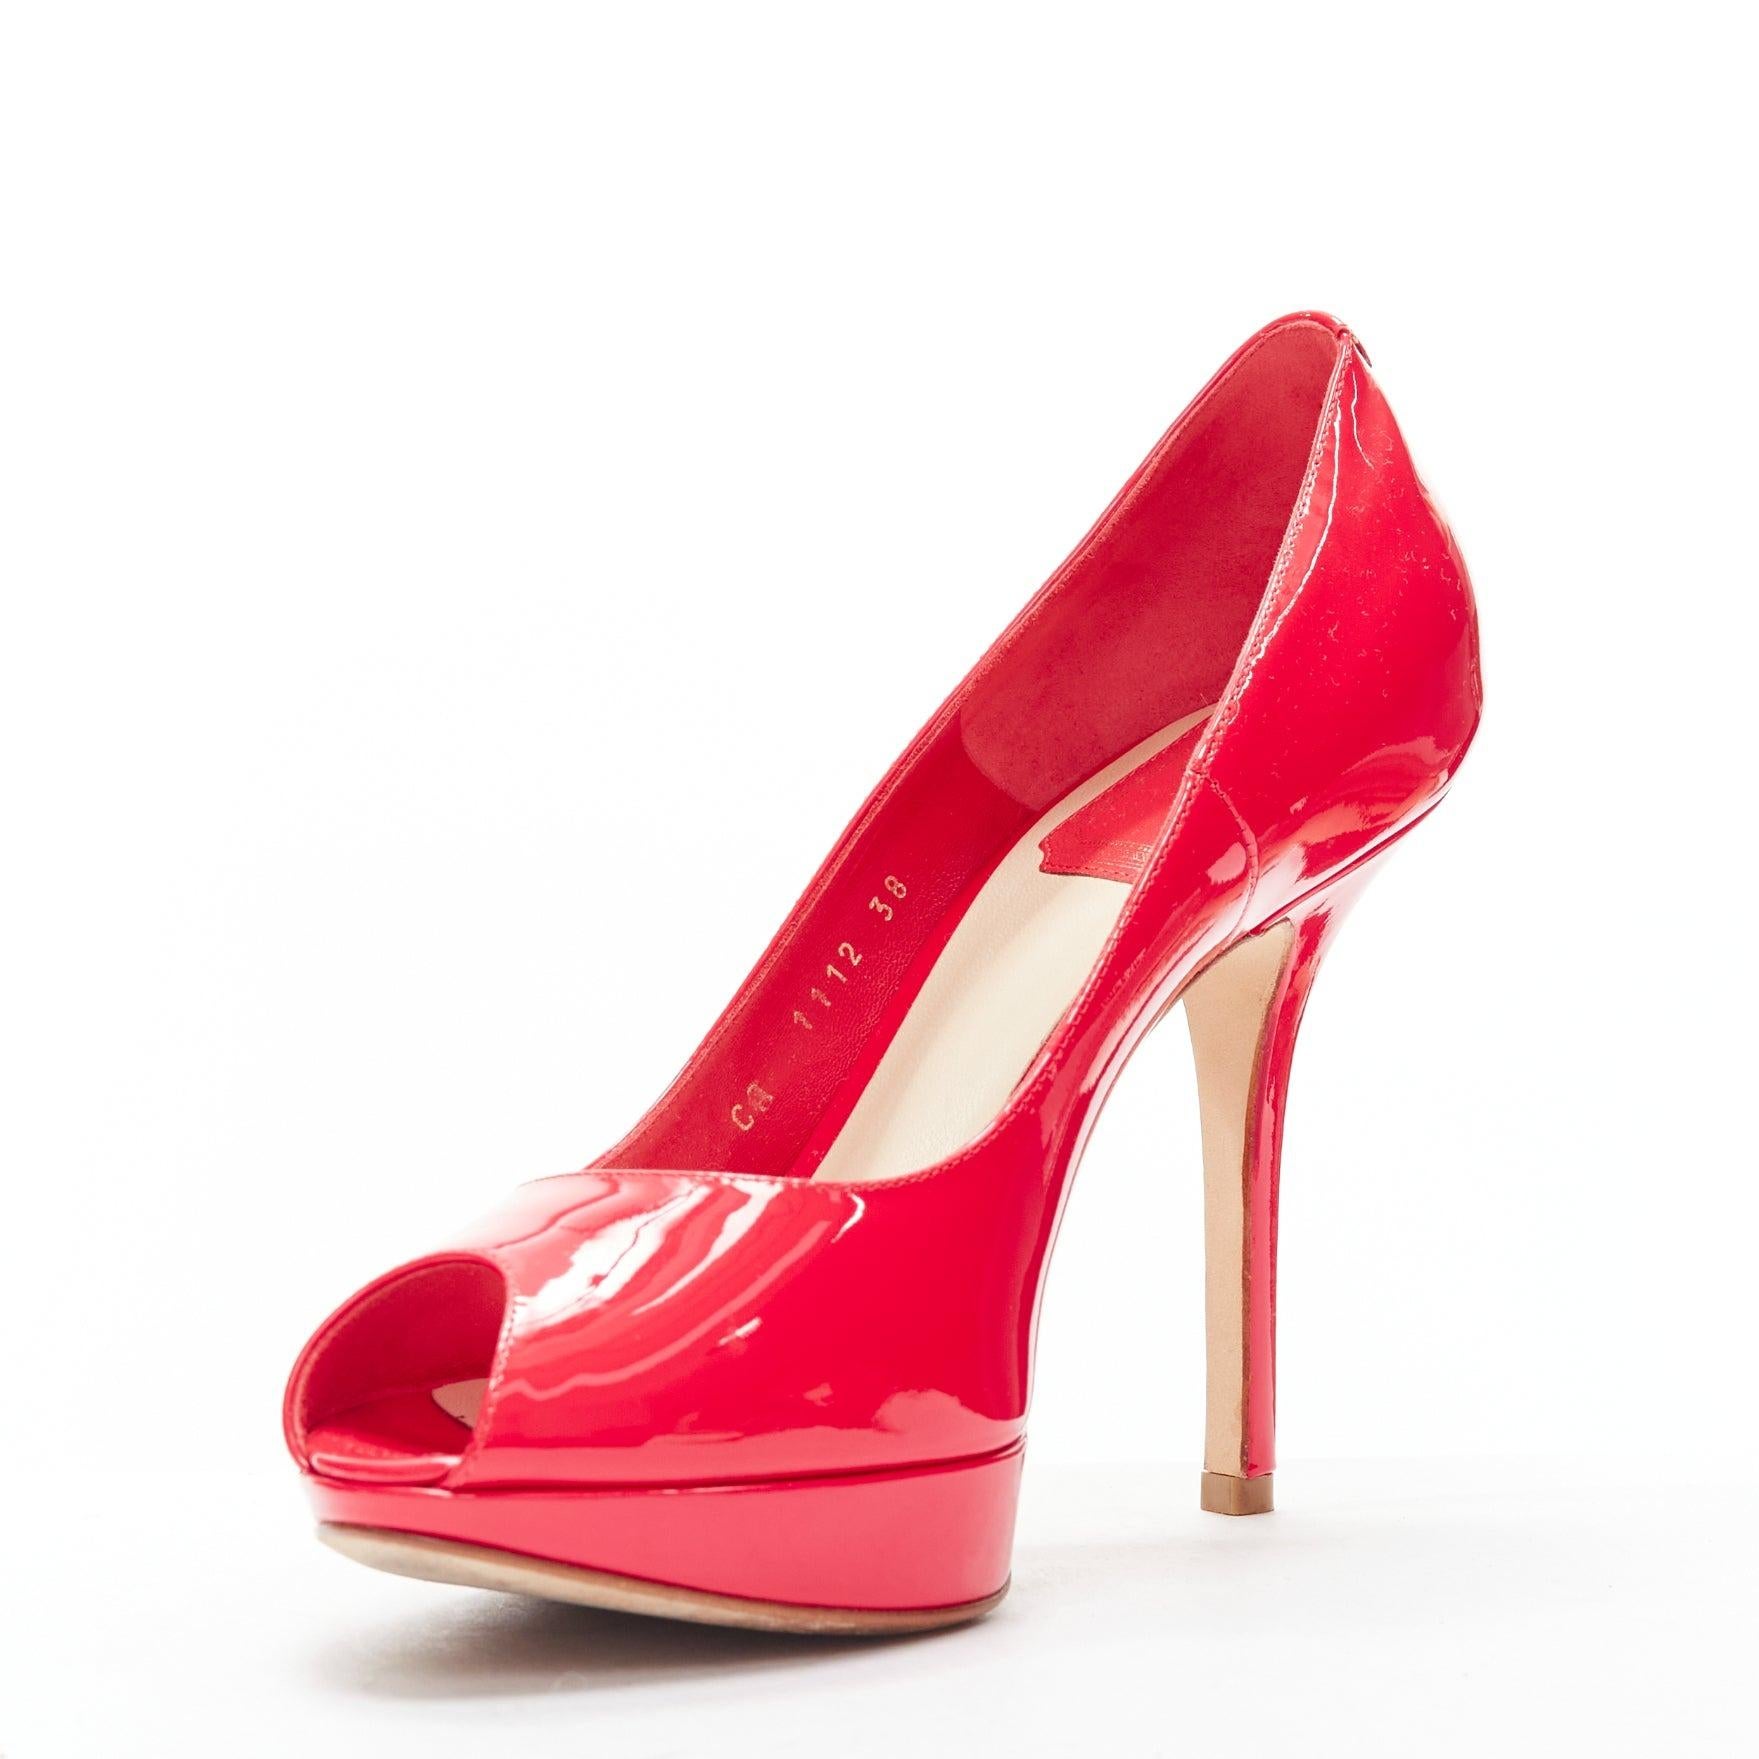 CHRISTIAN DIOR neon pink patent leather peep toe platform pumps EU38 In Excellent Condition For Sale In Hong Kong, NT